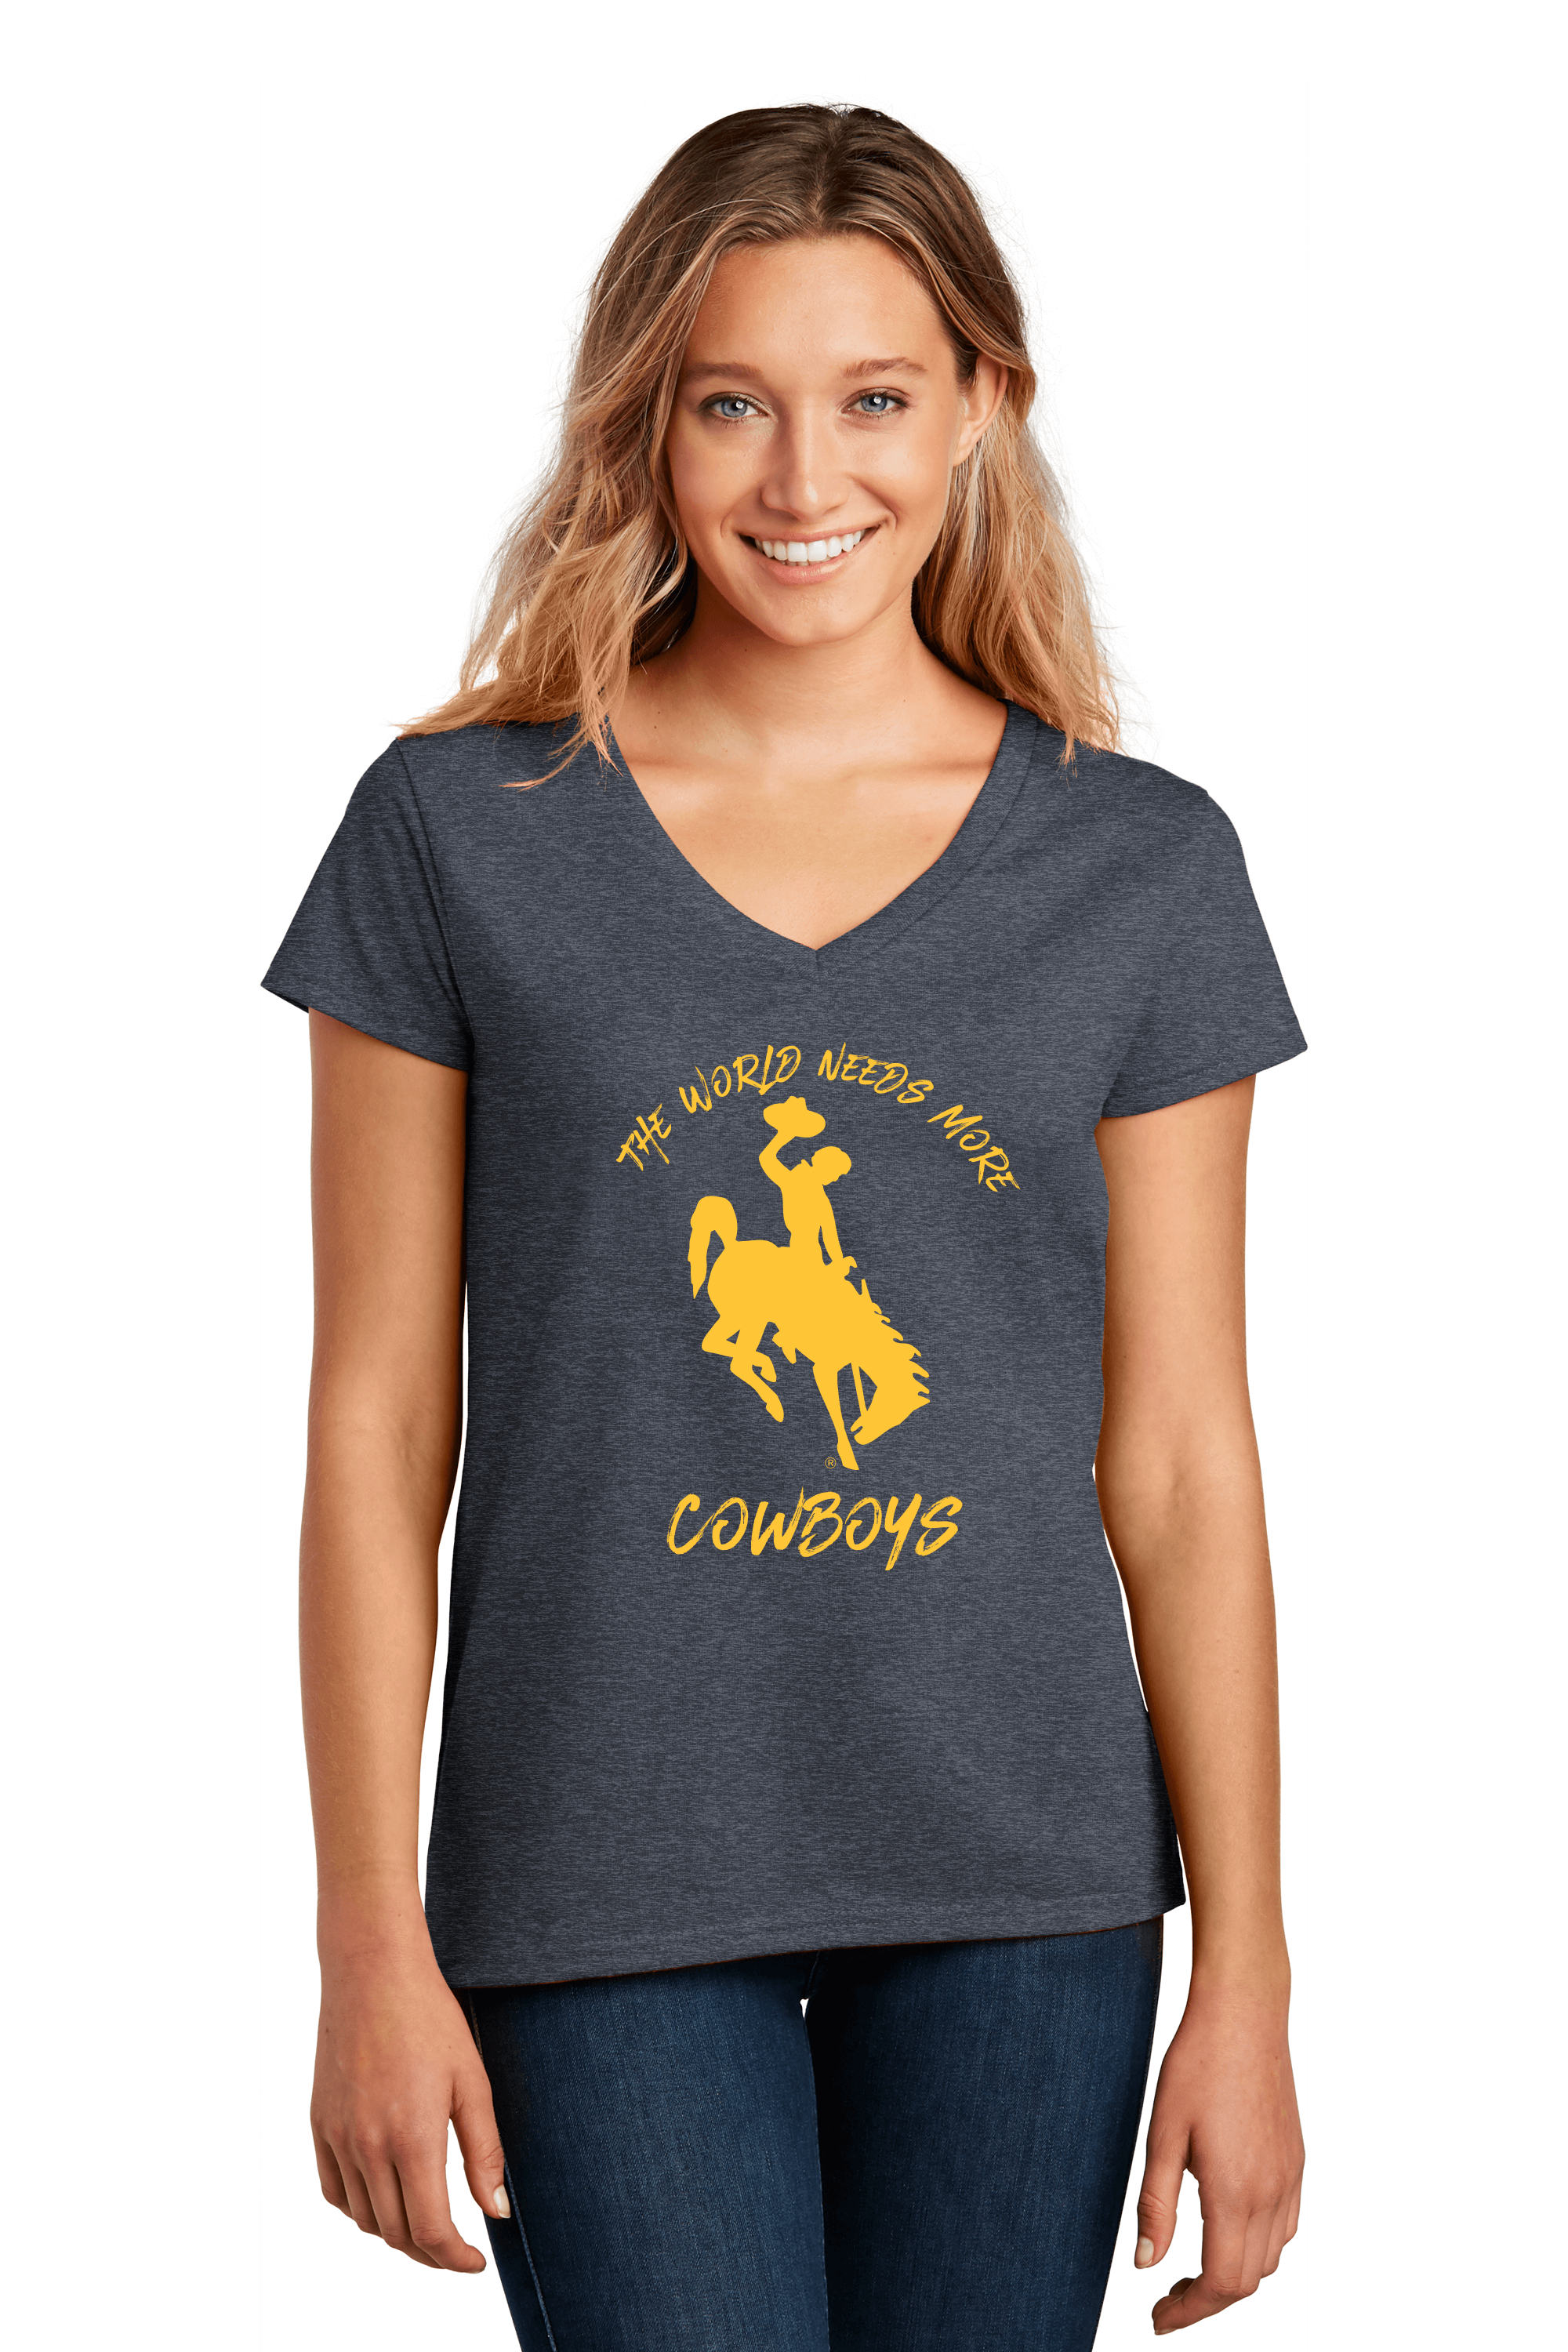 Ladies, The World Needs More Cowboys Shirt - Wind River Outpost